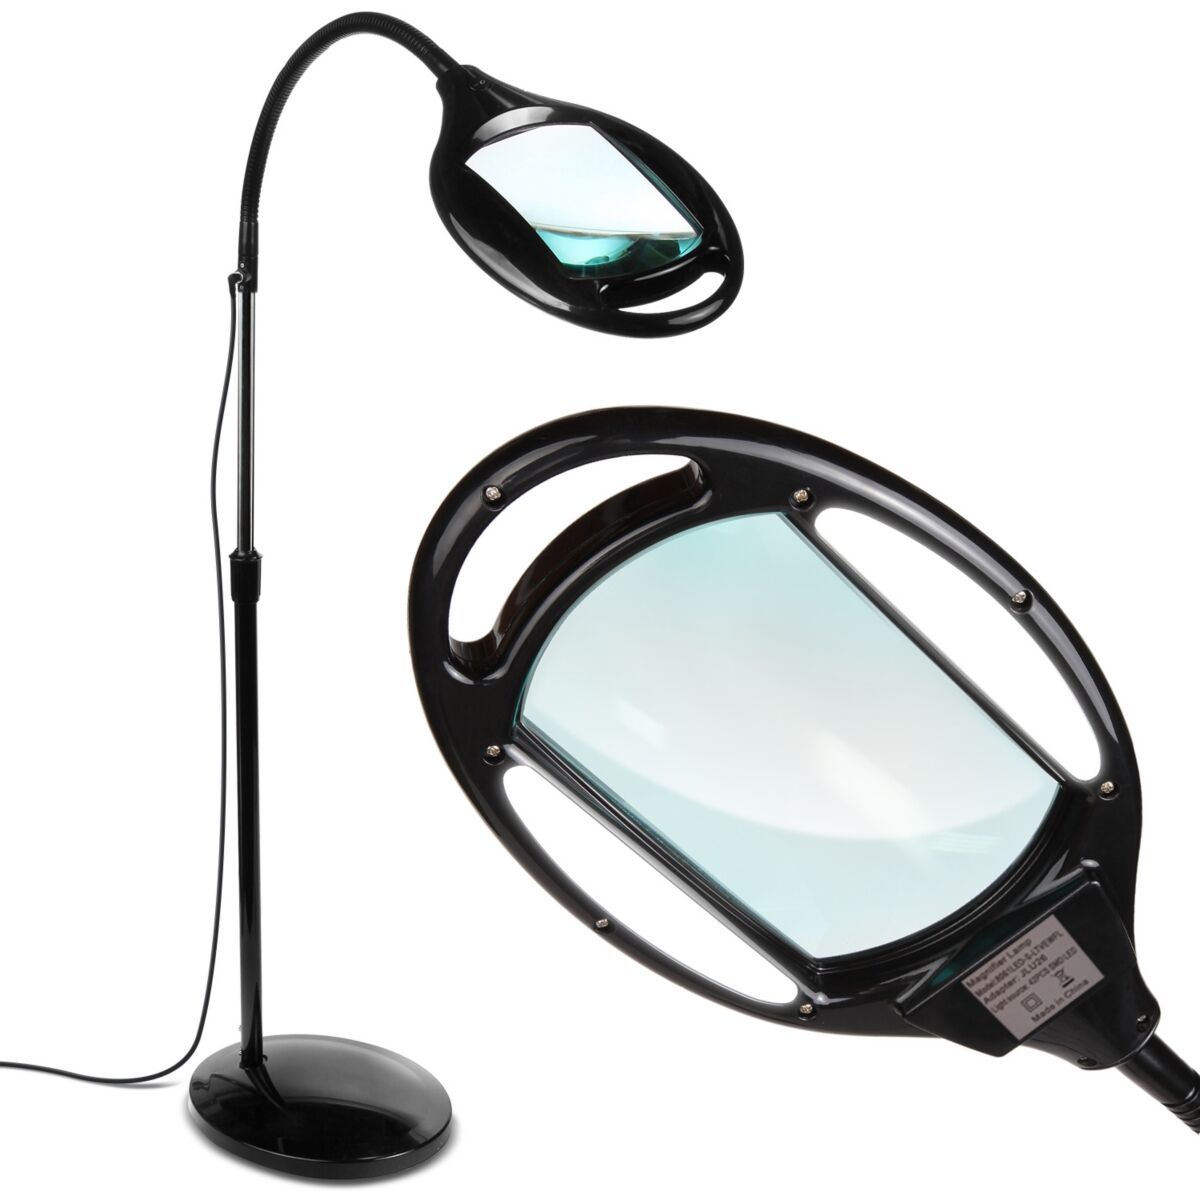 Brightech Lightview Pro Led Gooseneck Standing Magnifier Floor Lamp - (1.75x) 3 Diopter - Classic Black